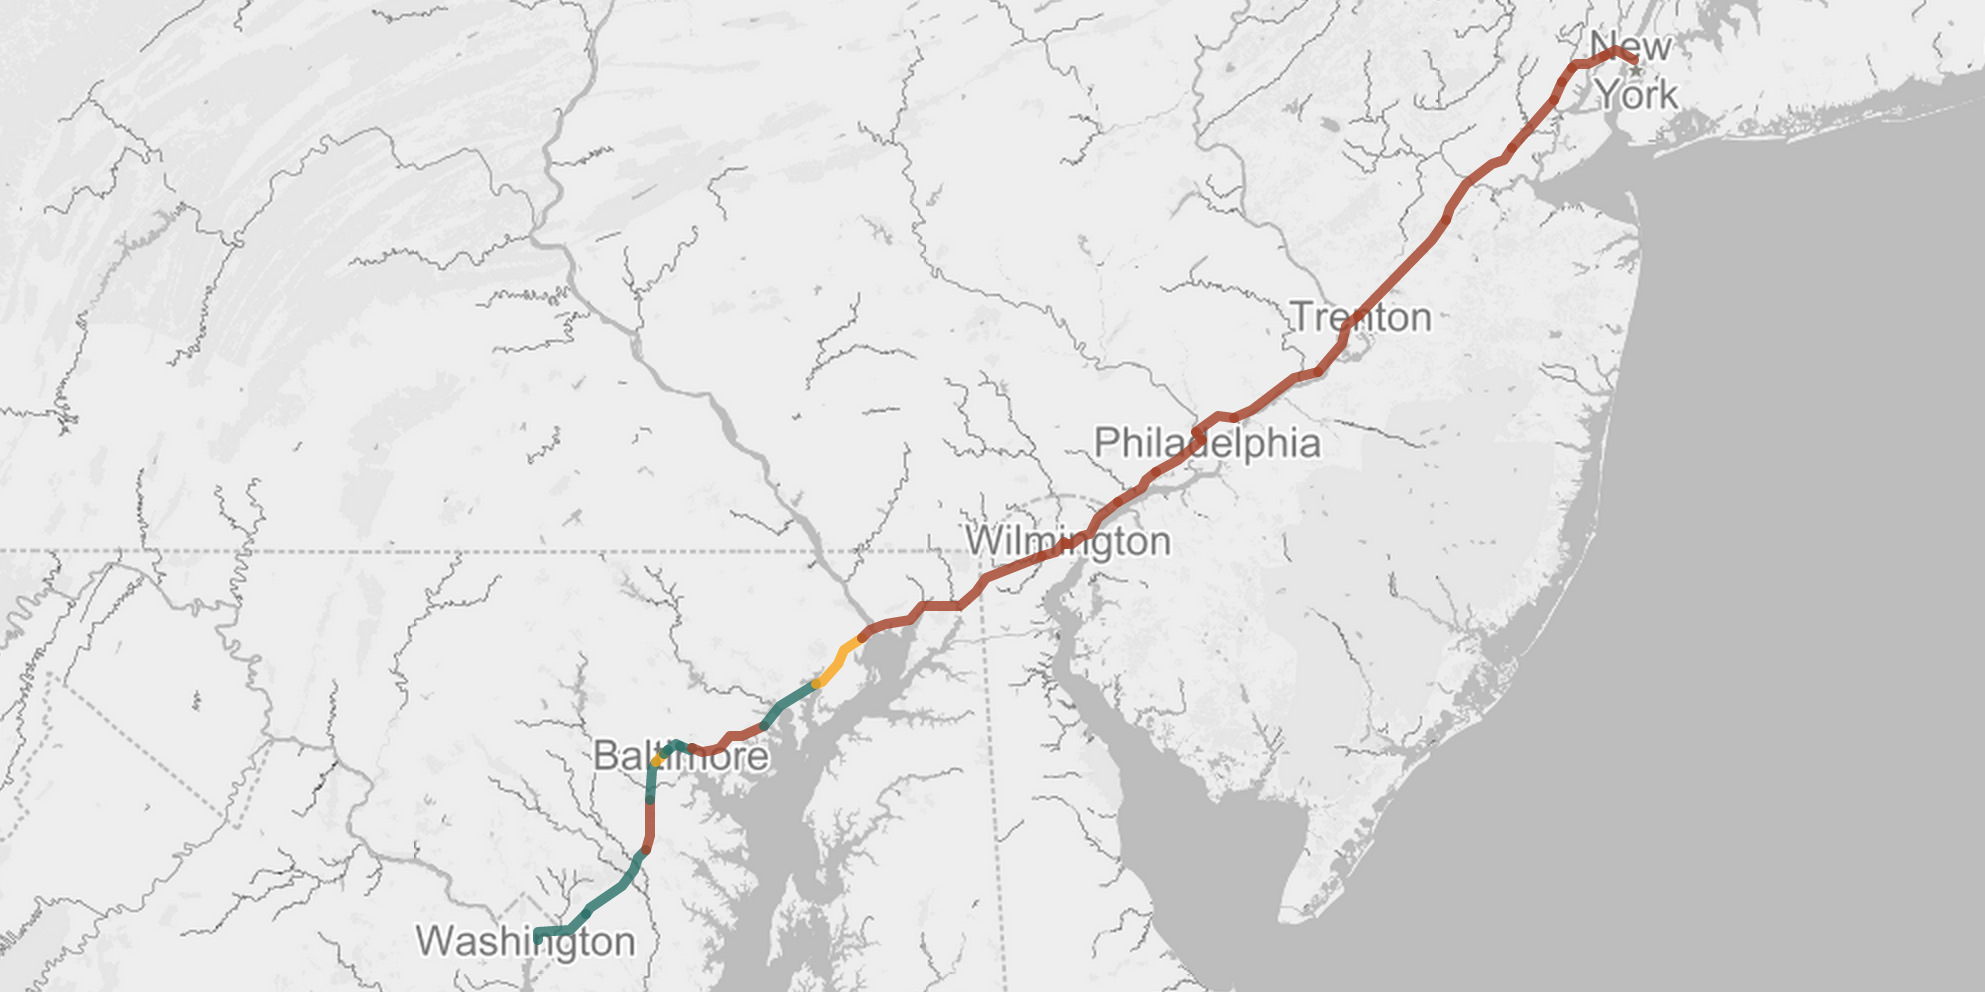 The National Journal tested download speeds on the AmtrakConnect WiFi service between D.C. and NYC. The few green spots along this line represent the only times they were able to connect with adequate broadband speeds. The swaths of red indicate speeds of anywhere from 0-.9 Mbps. (Courtesy: National Journal)